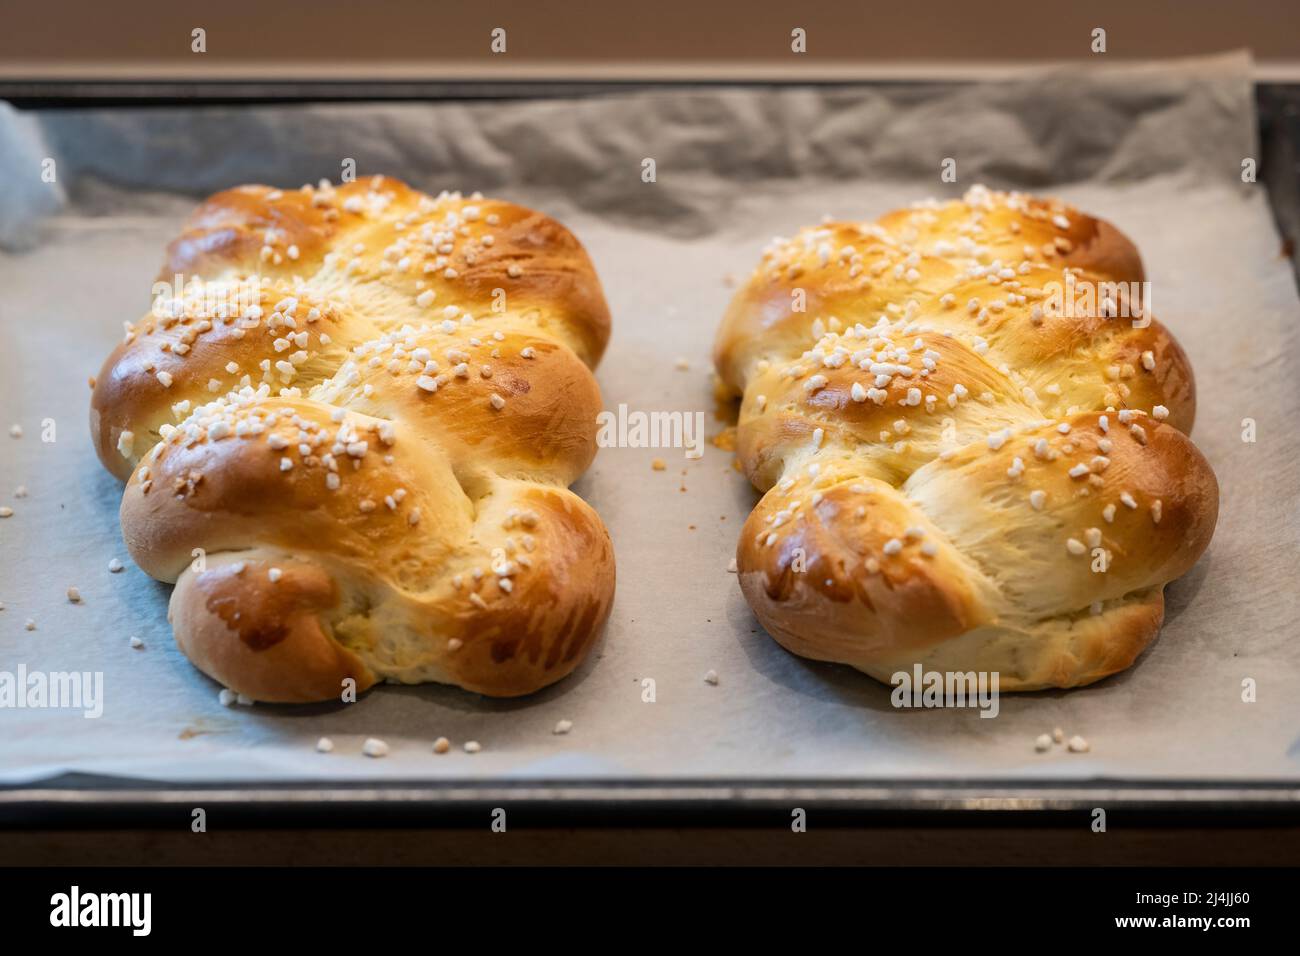 delicious homemade and baked easter braid on the baking tray fresh from the oven Stock Photo